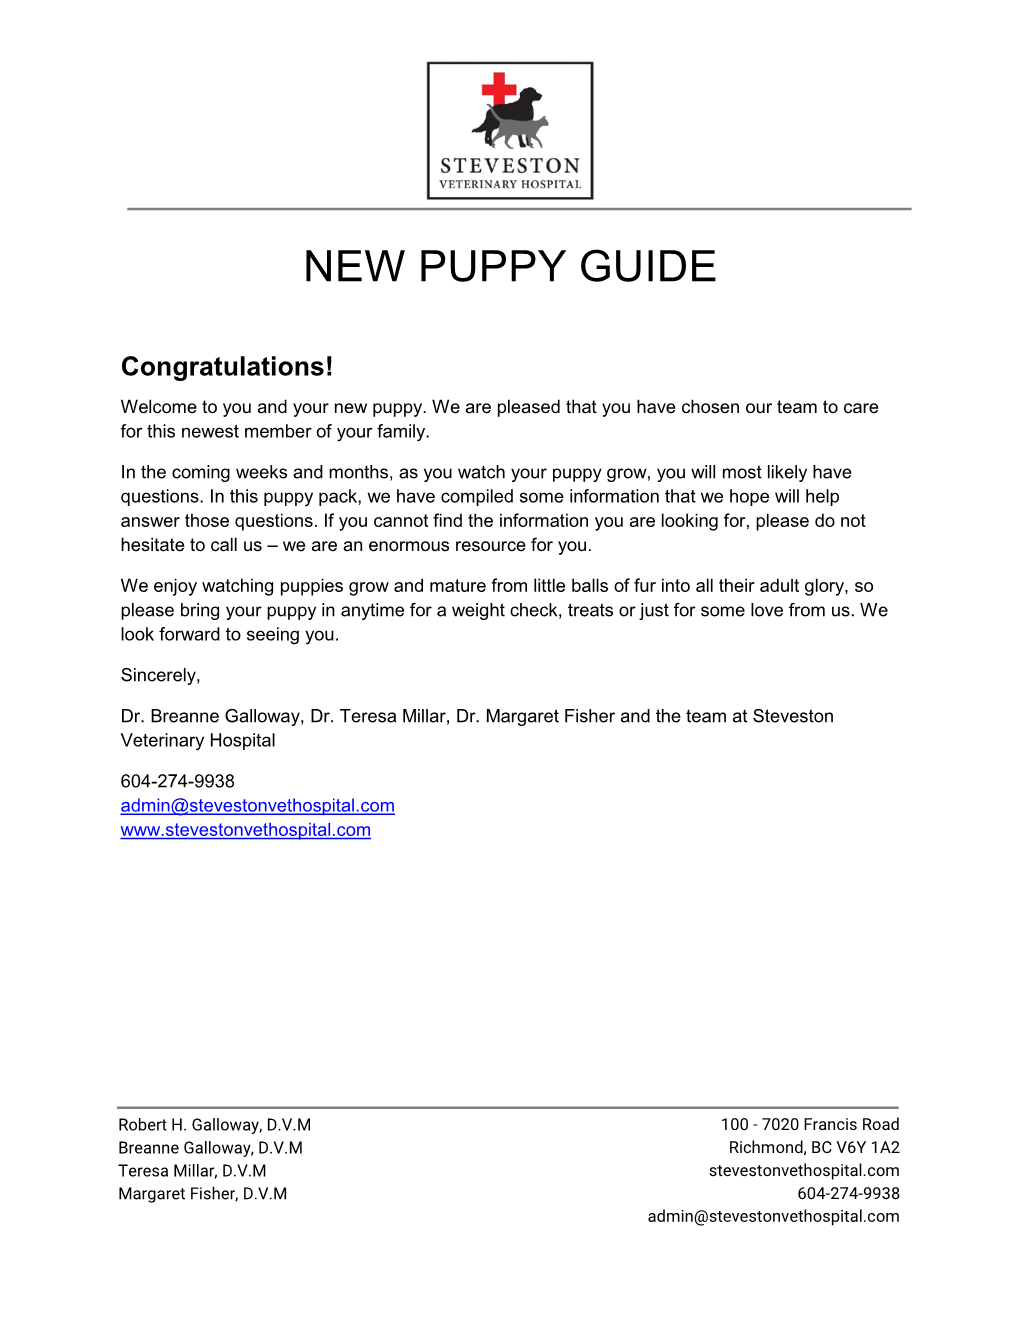 New Puppy Guide Contents